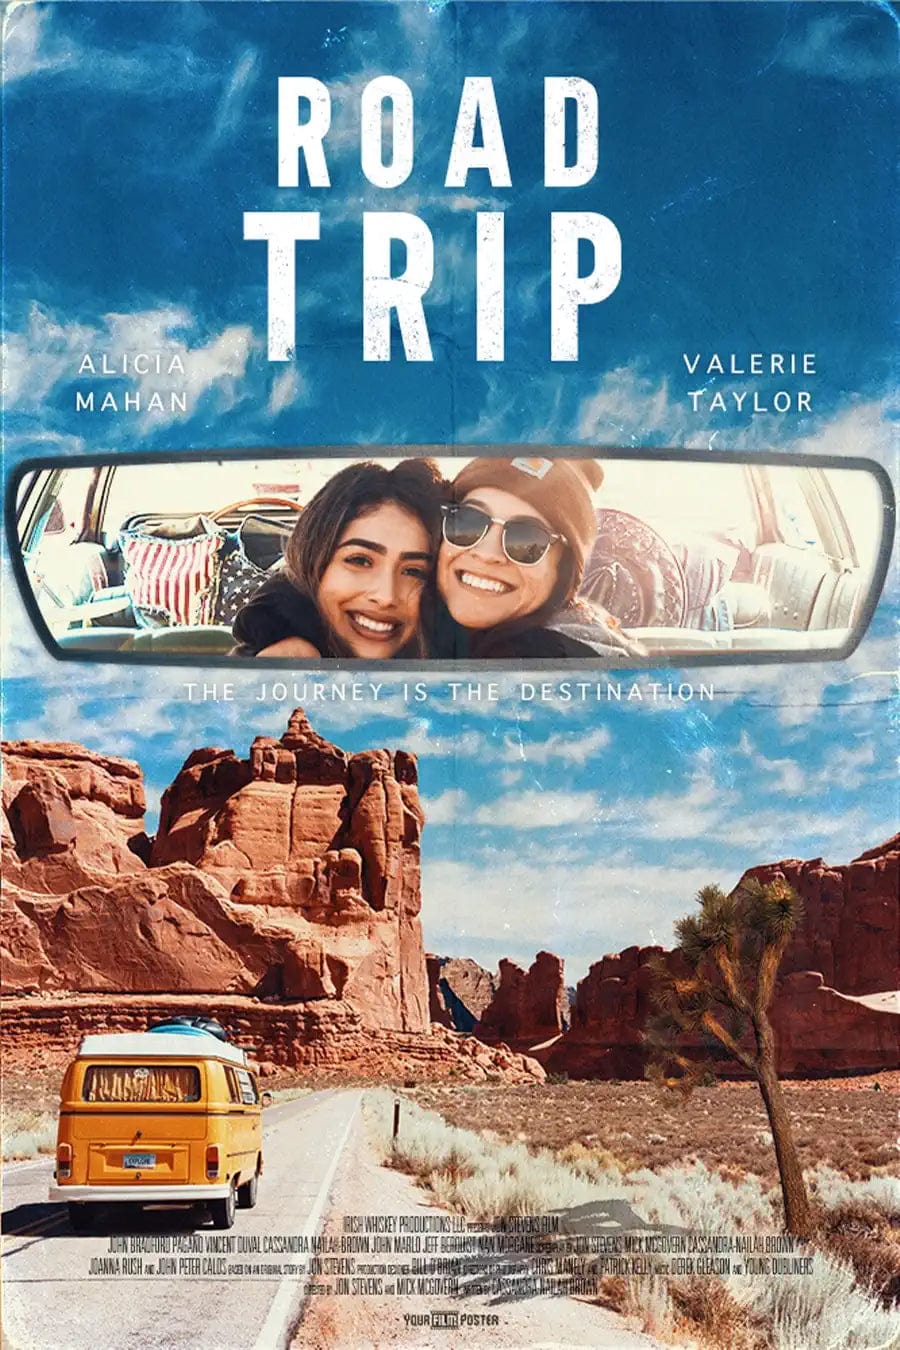 A customizable film poster showing a VW camper on an empty road in the desert, with a photo inside the rear view mirror of two friends on a roadtrip